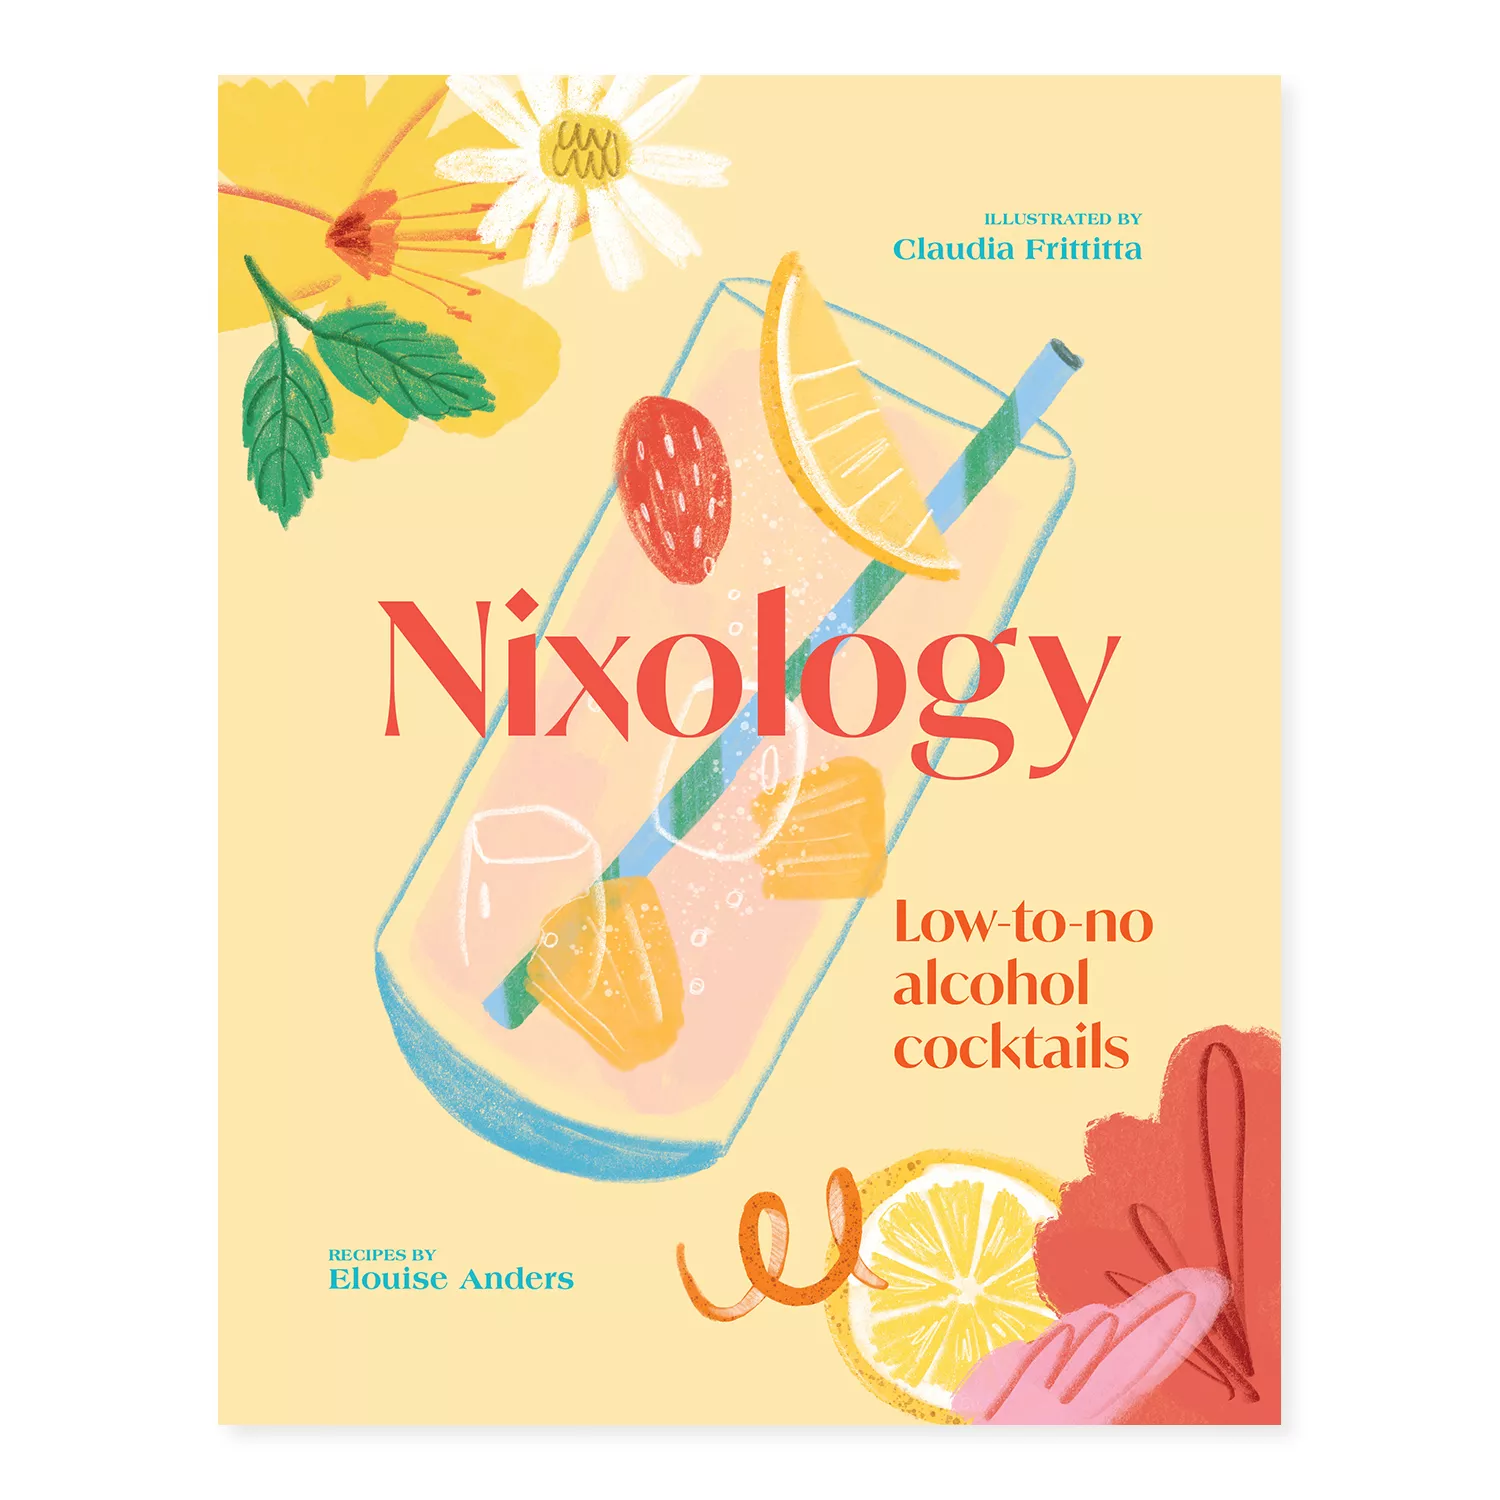 Nixology: Low-to-No Alcohol Cocktails